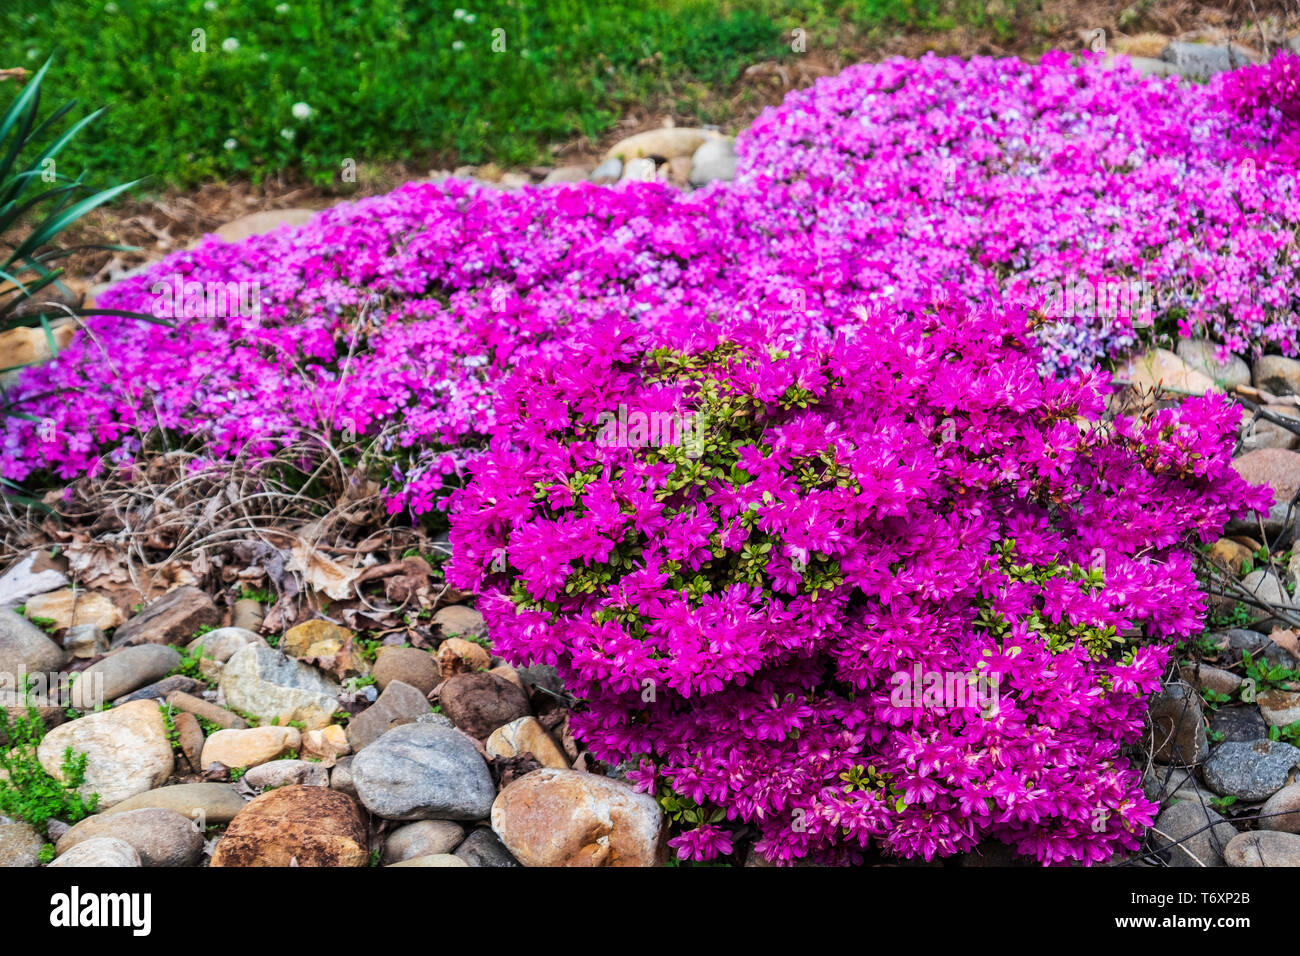 Pink creeping phlox, Phlox subulata, and pink Azalias, genus Rhododendron, Pentanthera, blooming in a spring planting in Knoxville, Tennessee, USA. Stock Photo